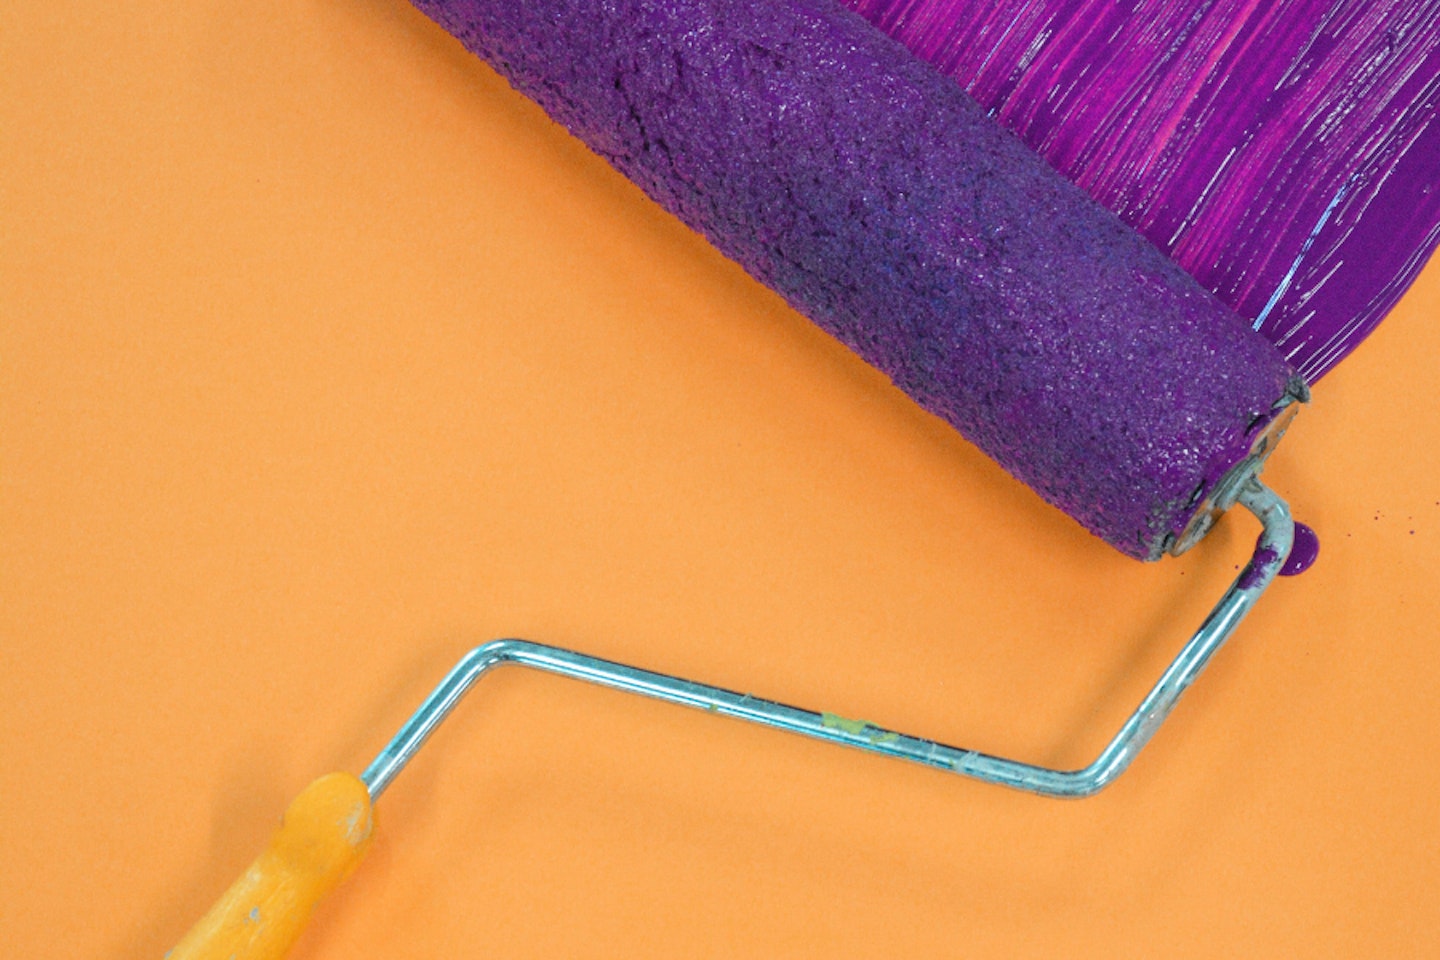 A paint roller with purple paint on a wall